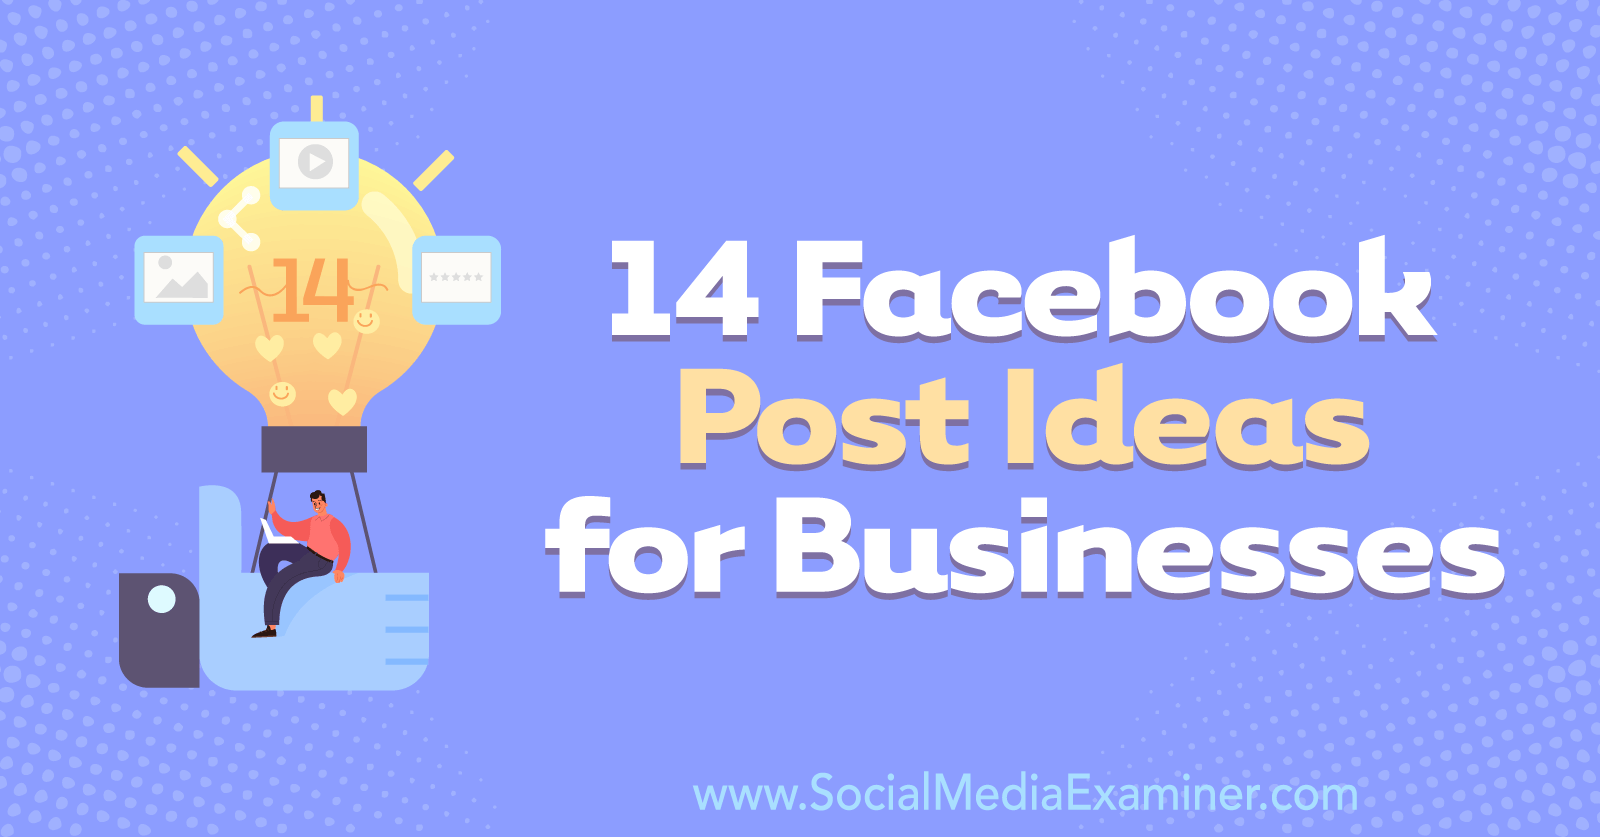 14 Facebook Post Ideas for Businesses by Anna Sonnenberg by on Social Media Examiner.